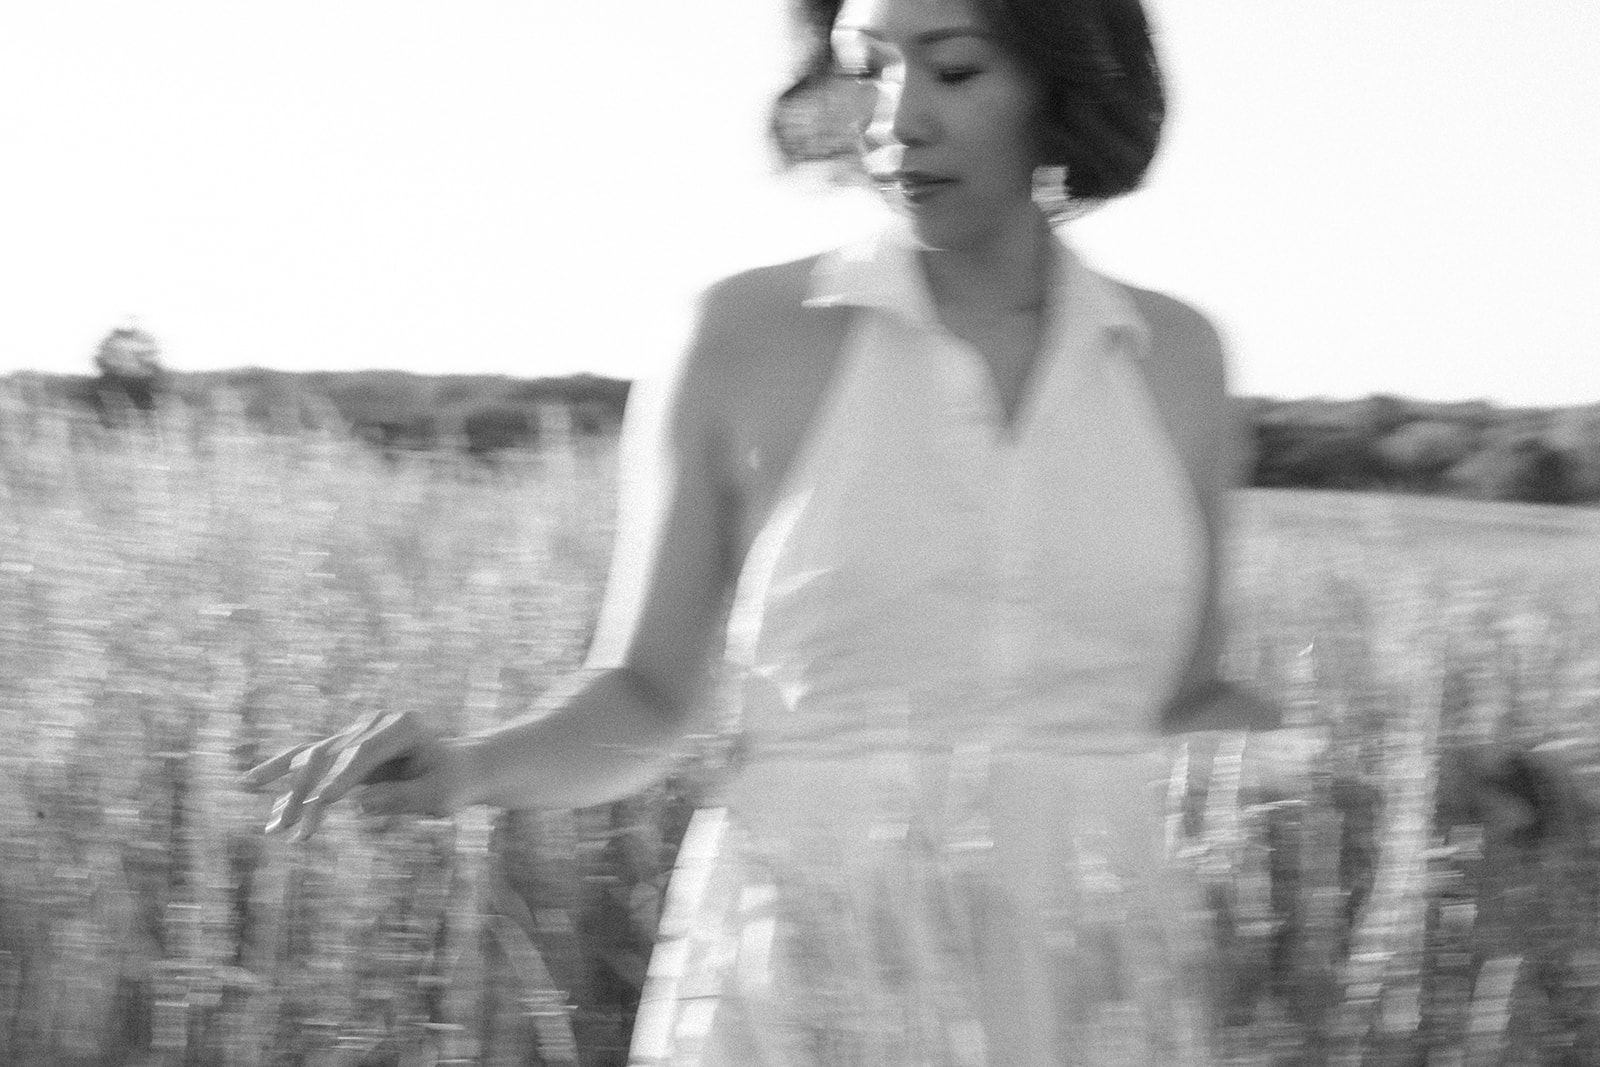 Kim at Manassas Battlefield Park in a white dress, radiating joy and beauty during the photoshoot.